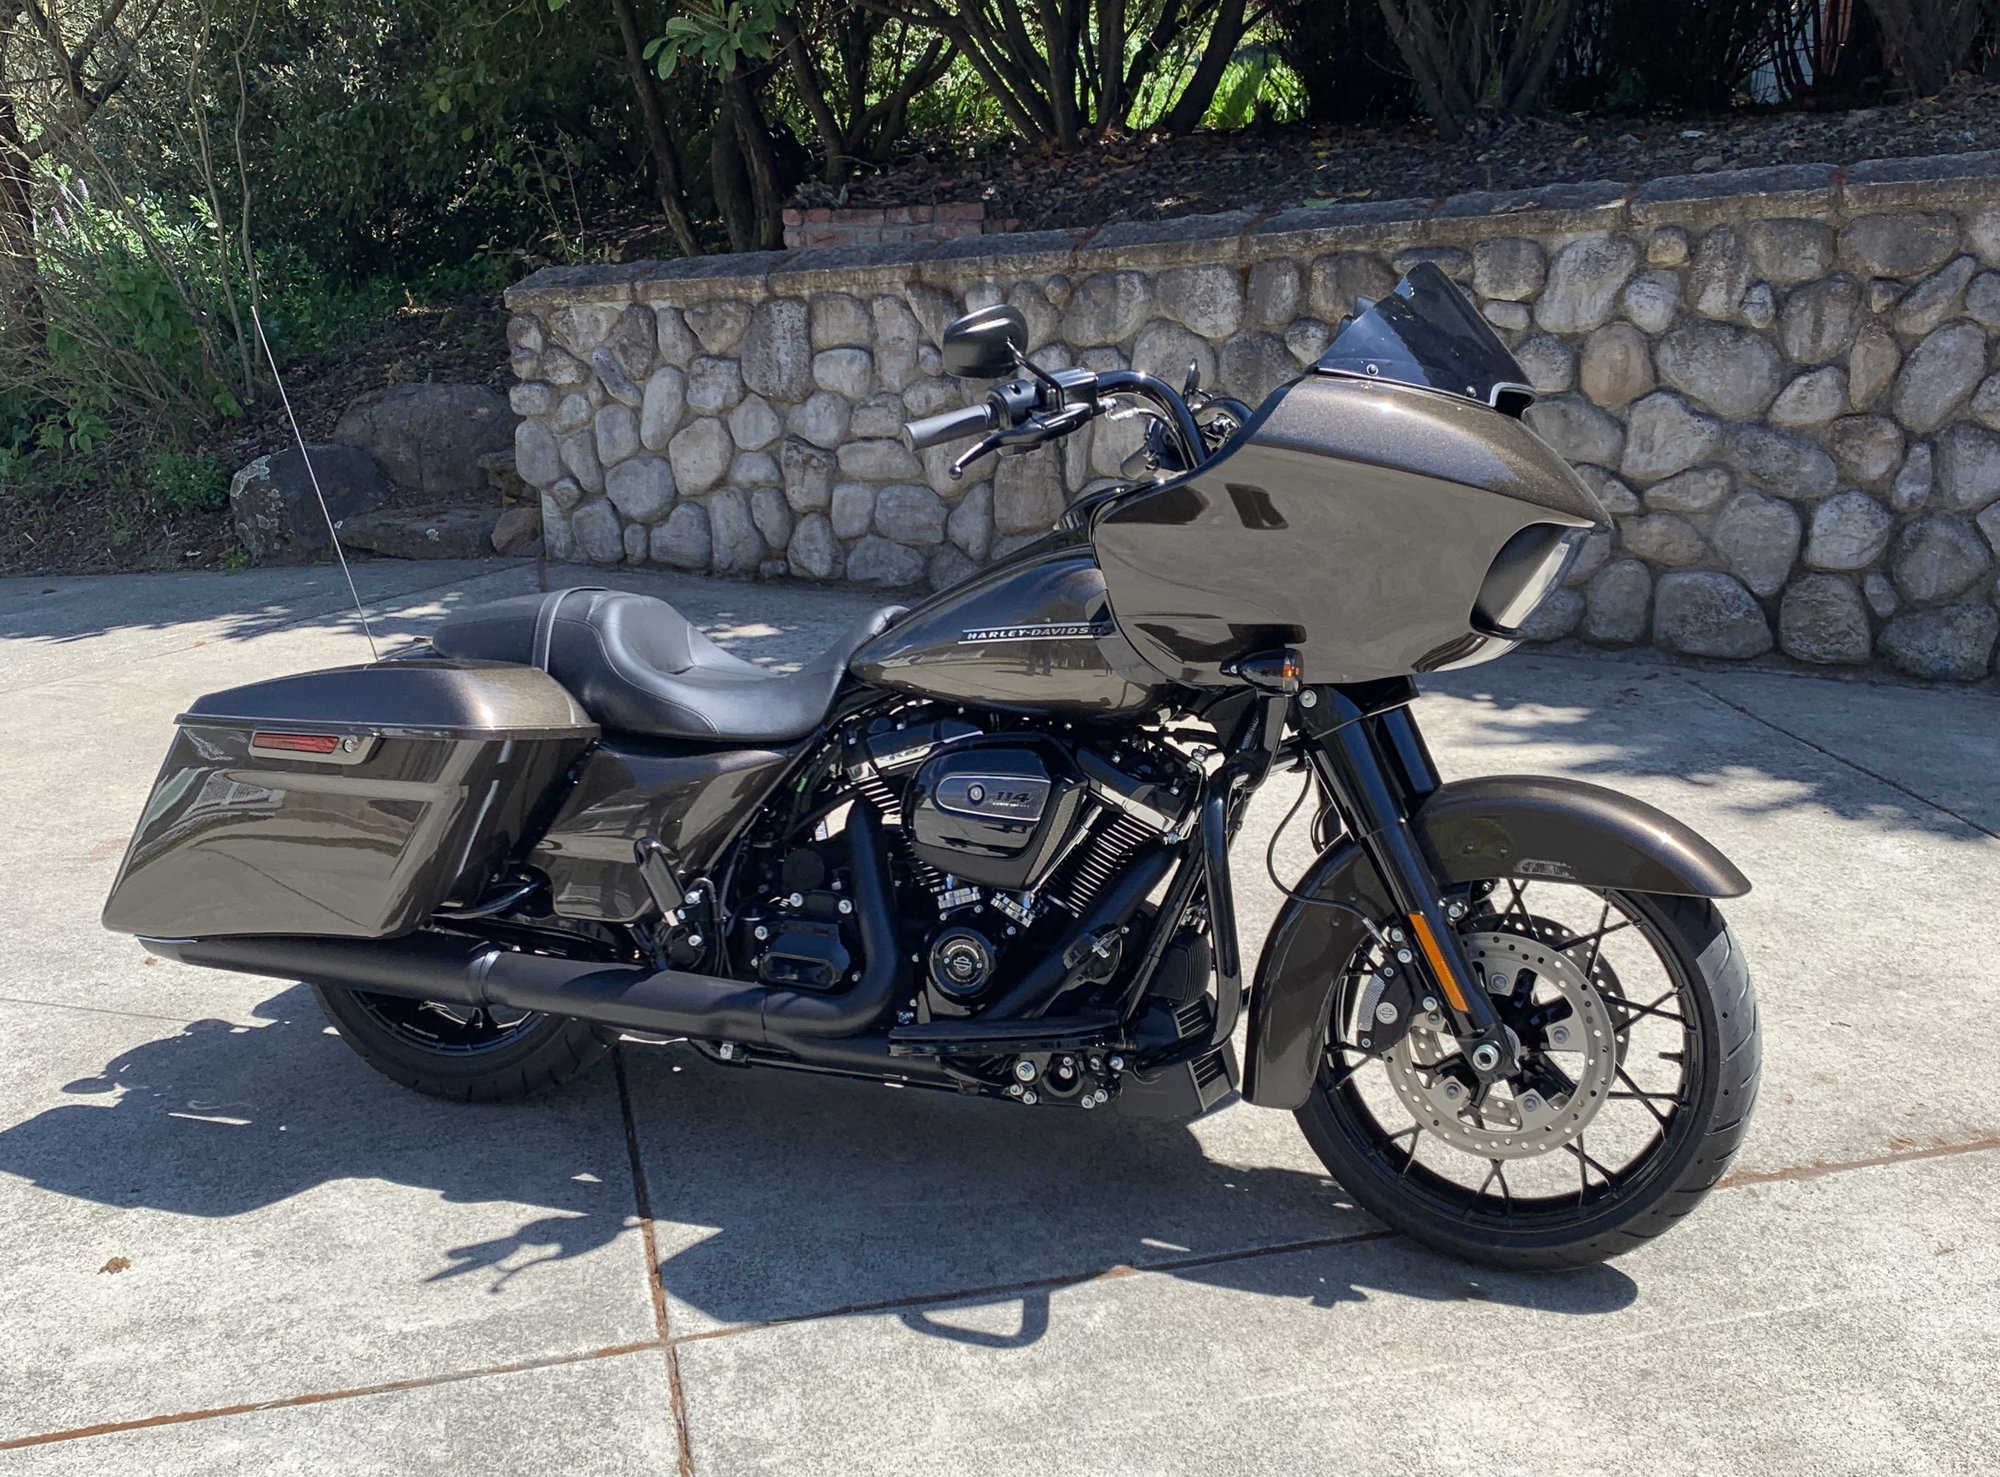 2019 Harley Davidson Road Glide Special Stage 3 W Tbr Exhaust Youtube